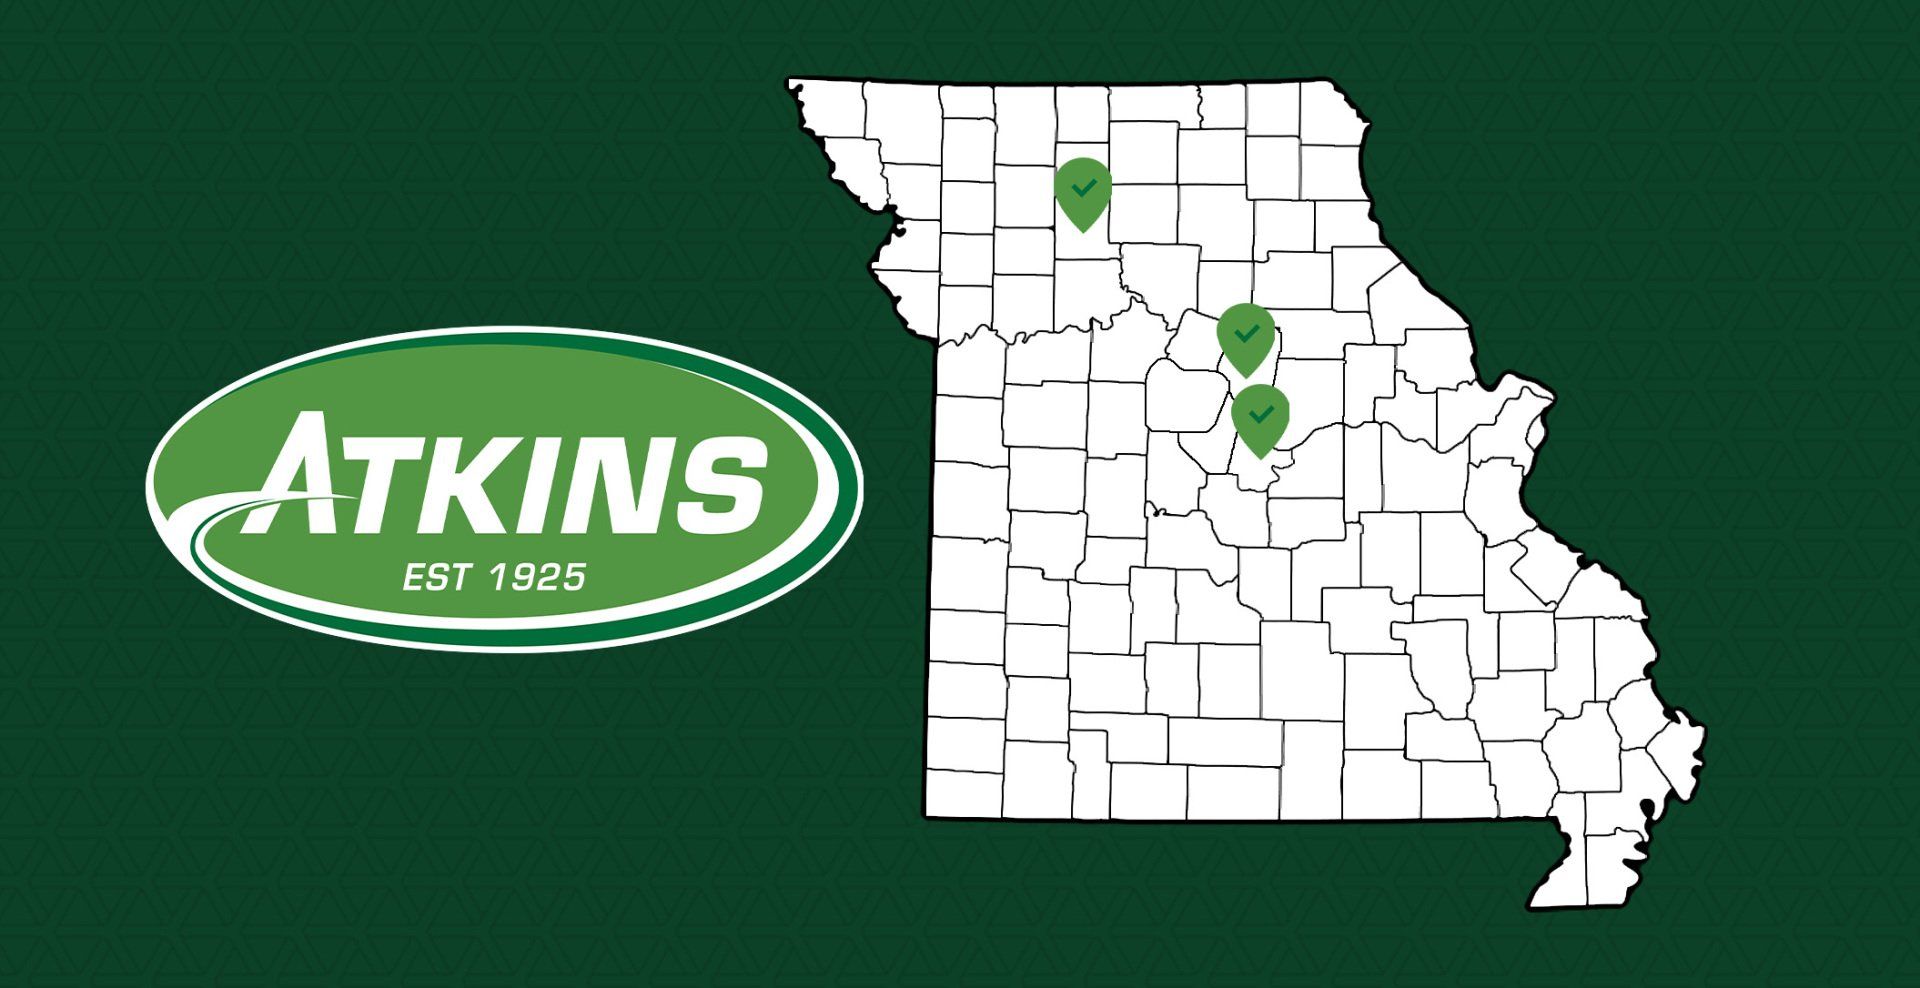 Call Atkins for Commercial Pest Control in Jefferson City, MO! We Serve Columbia & Chillicothe, MO